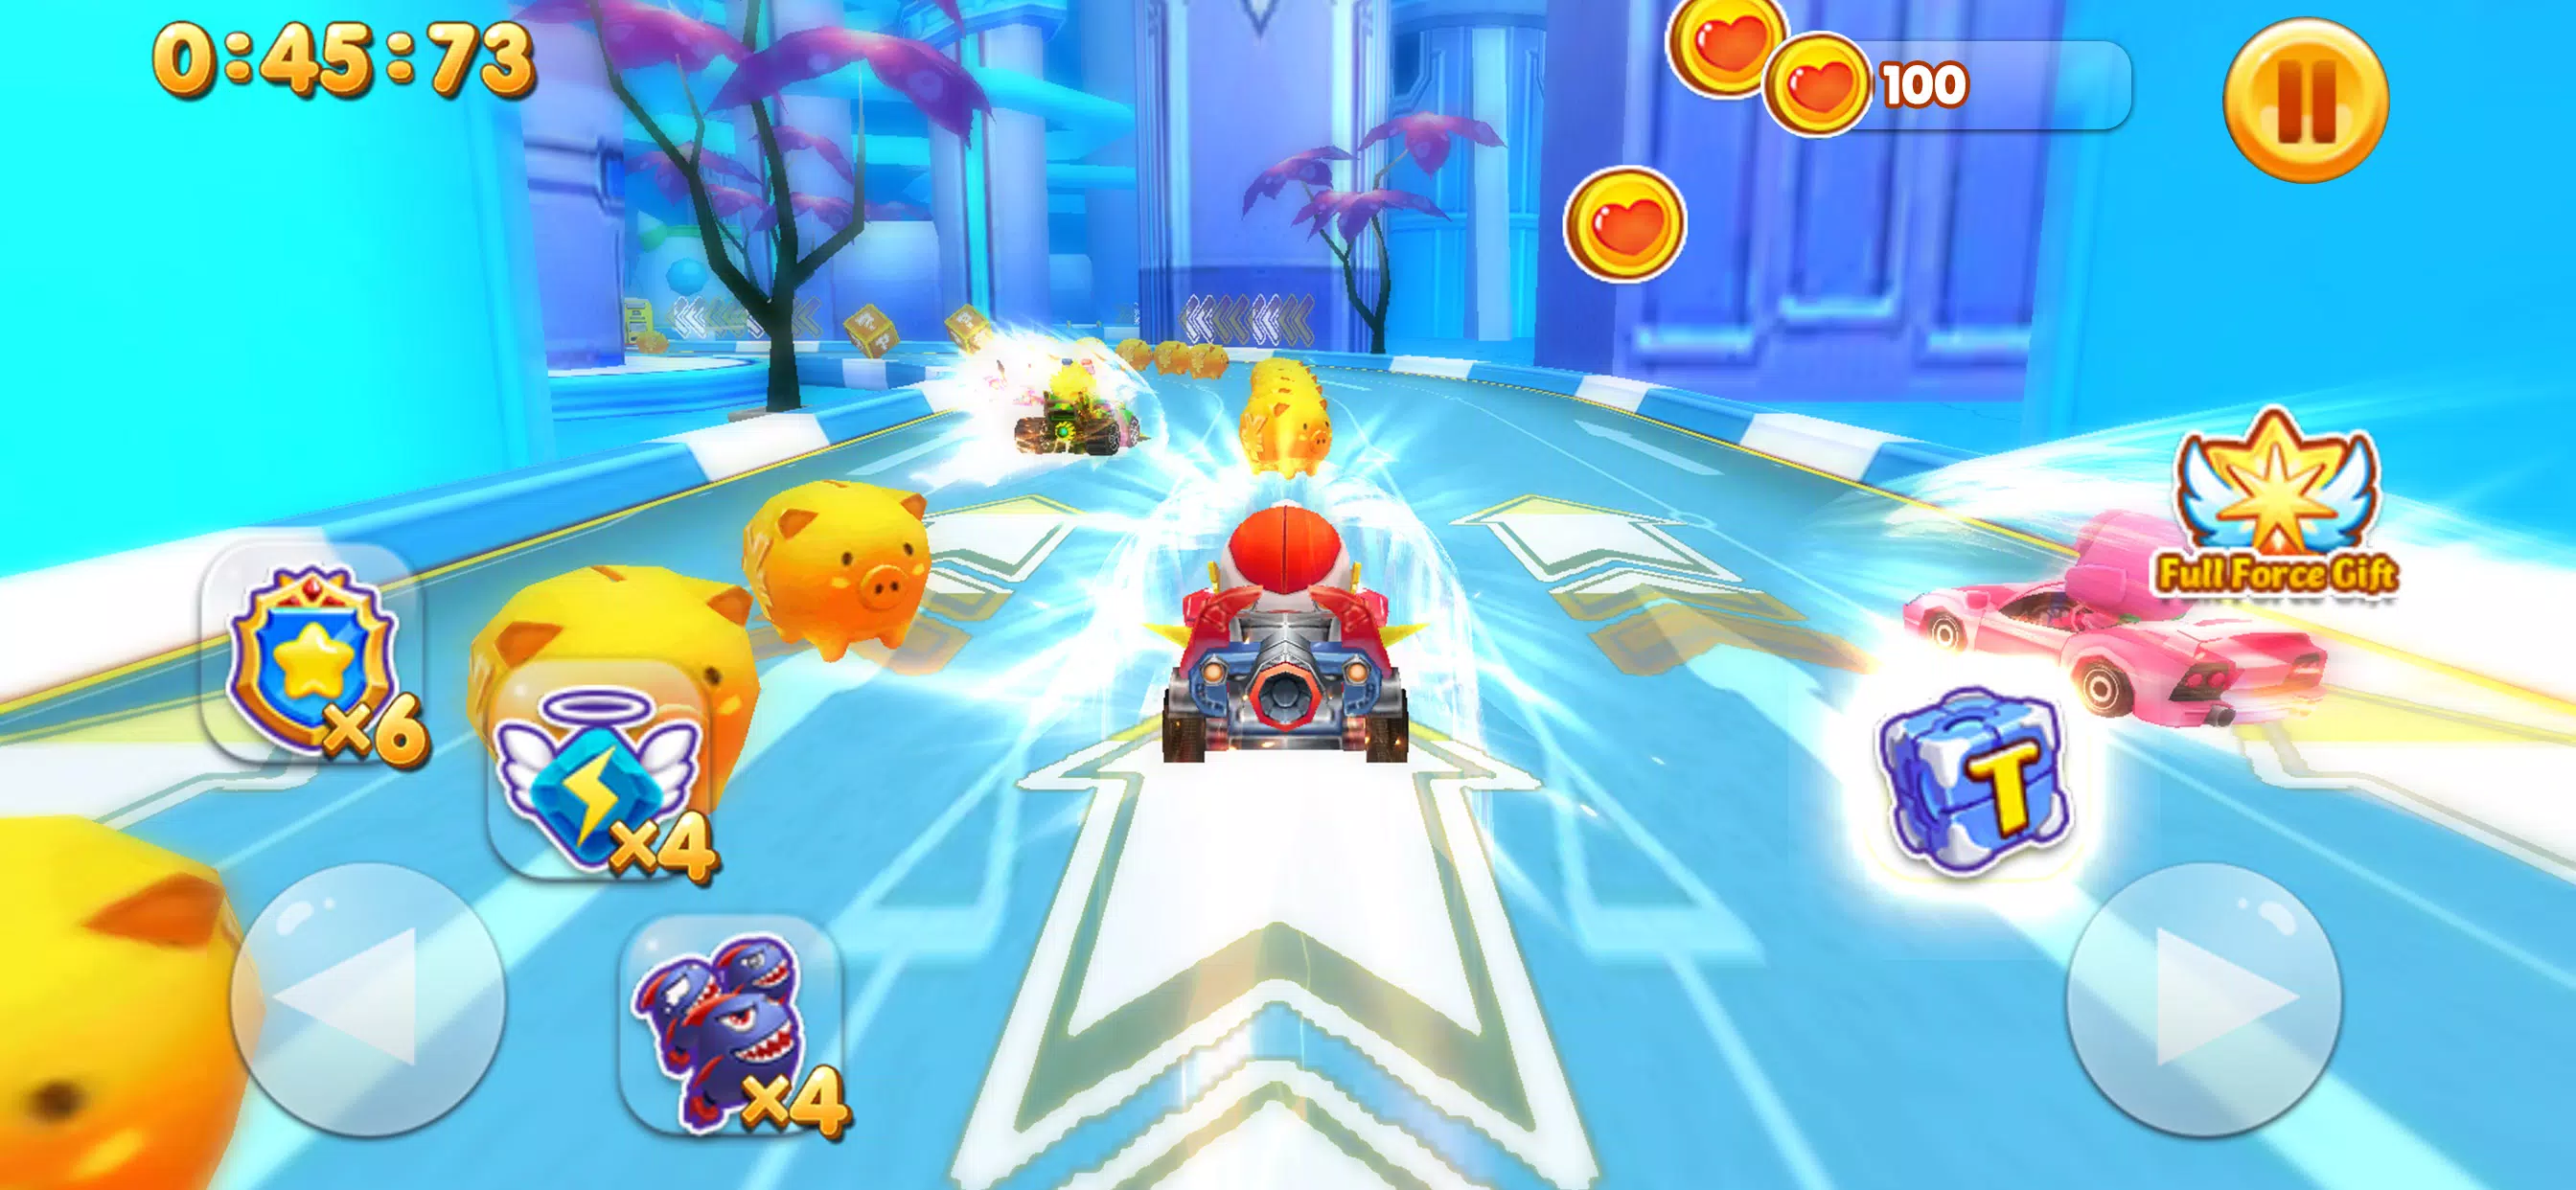 Mario Kart Tour Mod Apk is coming back with some great and